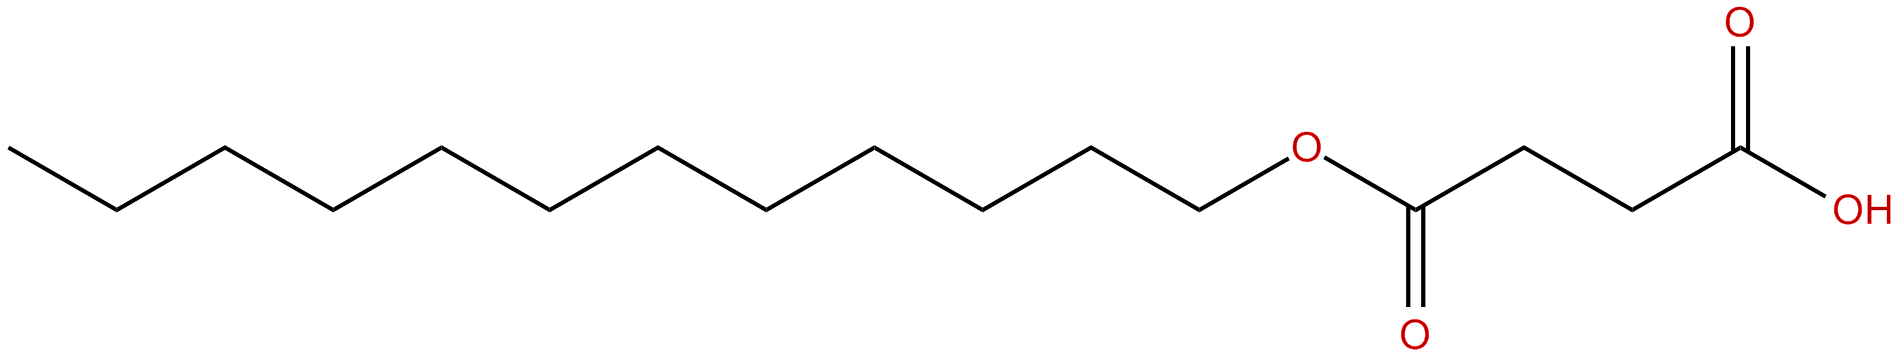 Image of monododecyl succinate